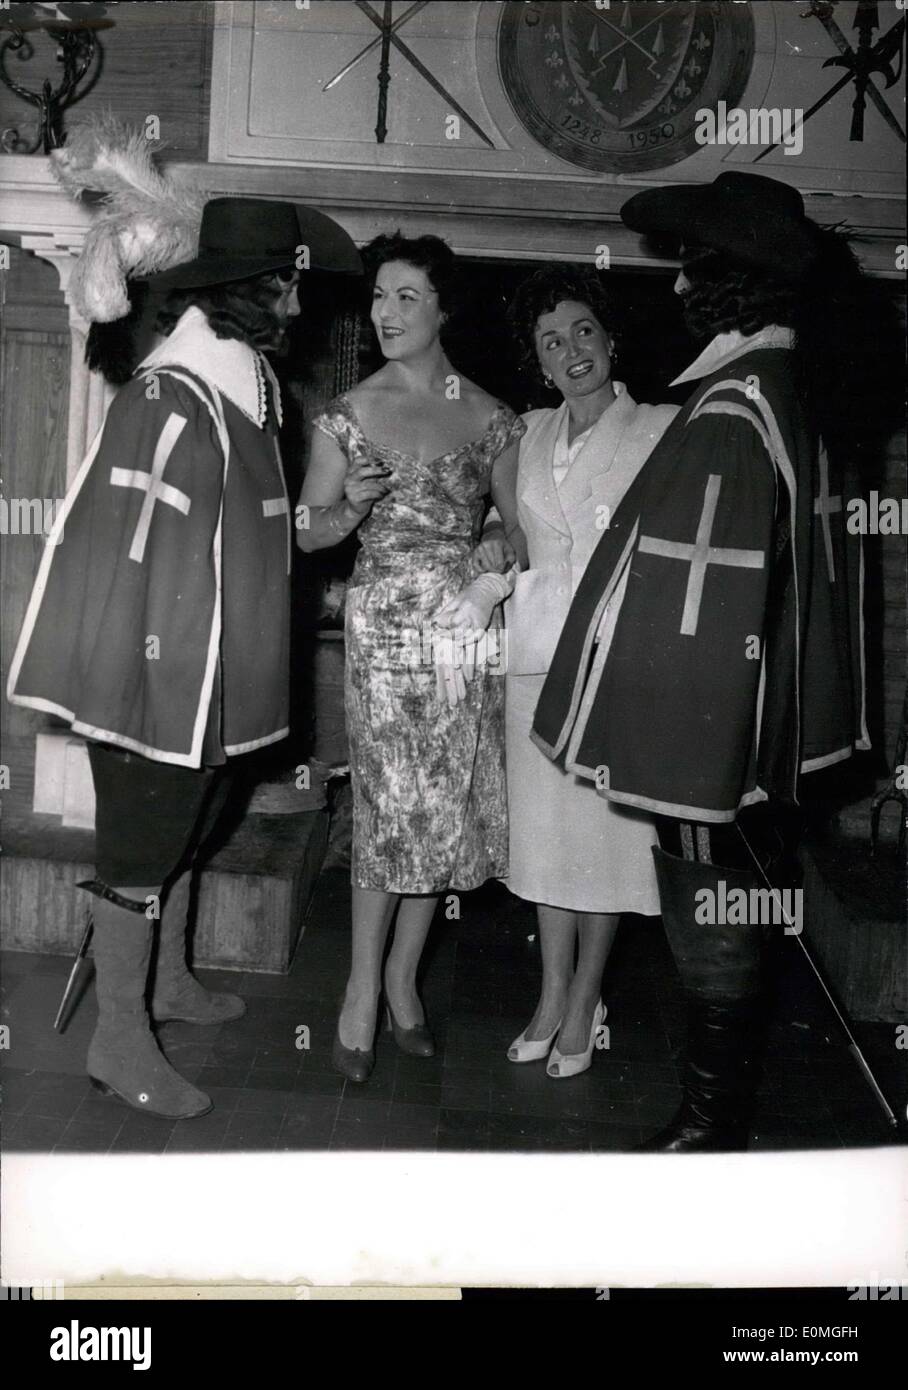 May 05, 1955 - Musketeers were there - but where was milady?:Radio Singer Rose Avril right and Starlet Denise Carvenne have a Stock Photo